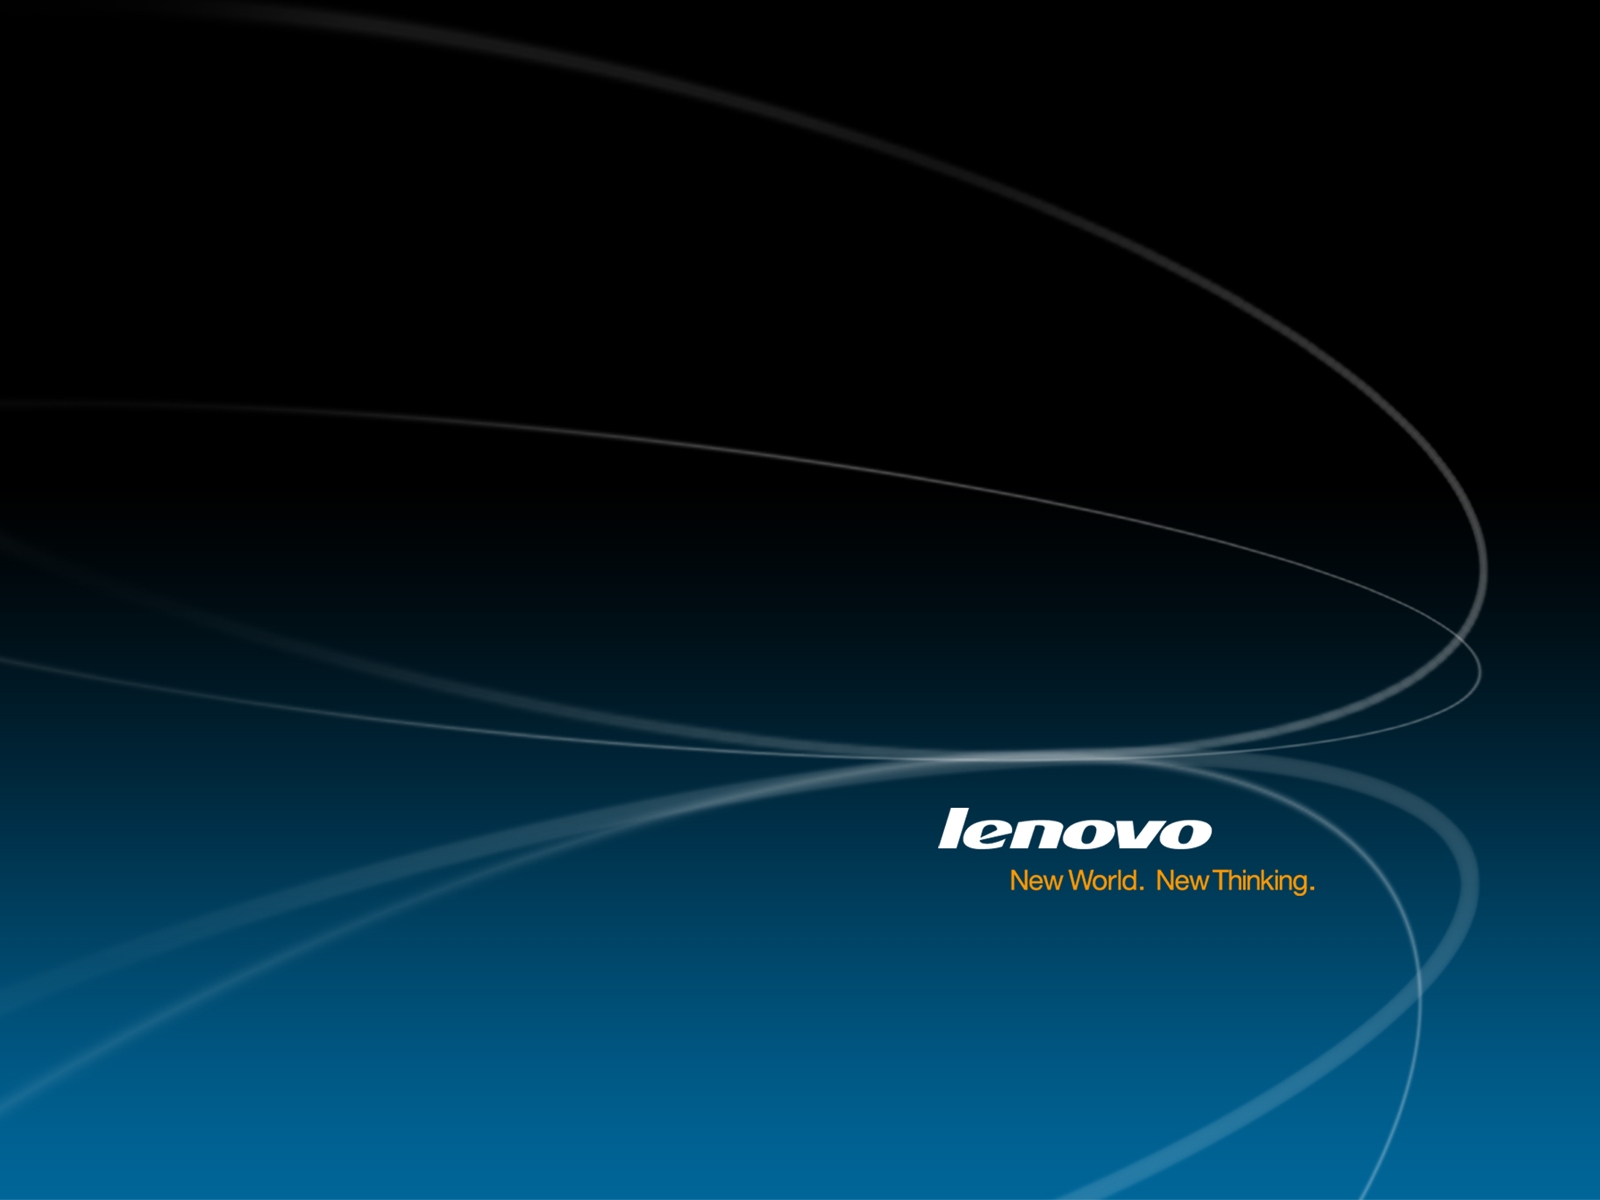 Related Pictures lenovo background wallpaper free 1440x900 pixel